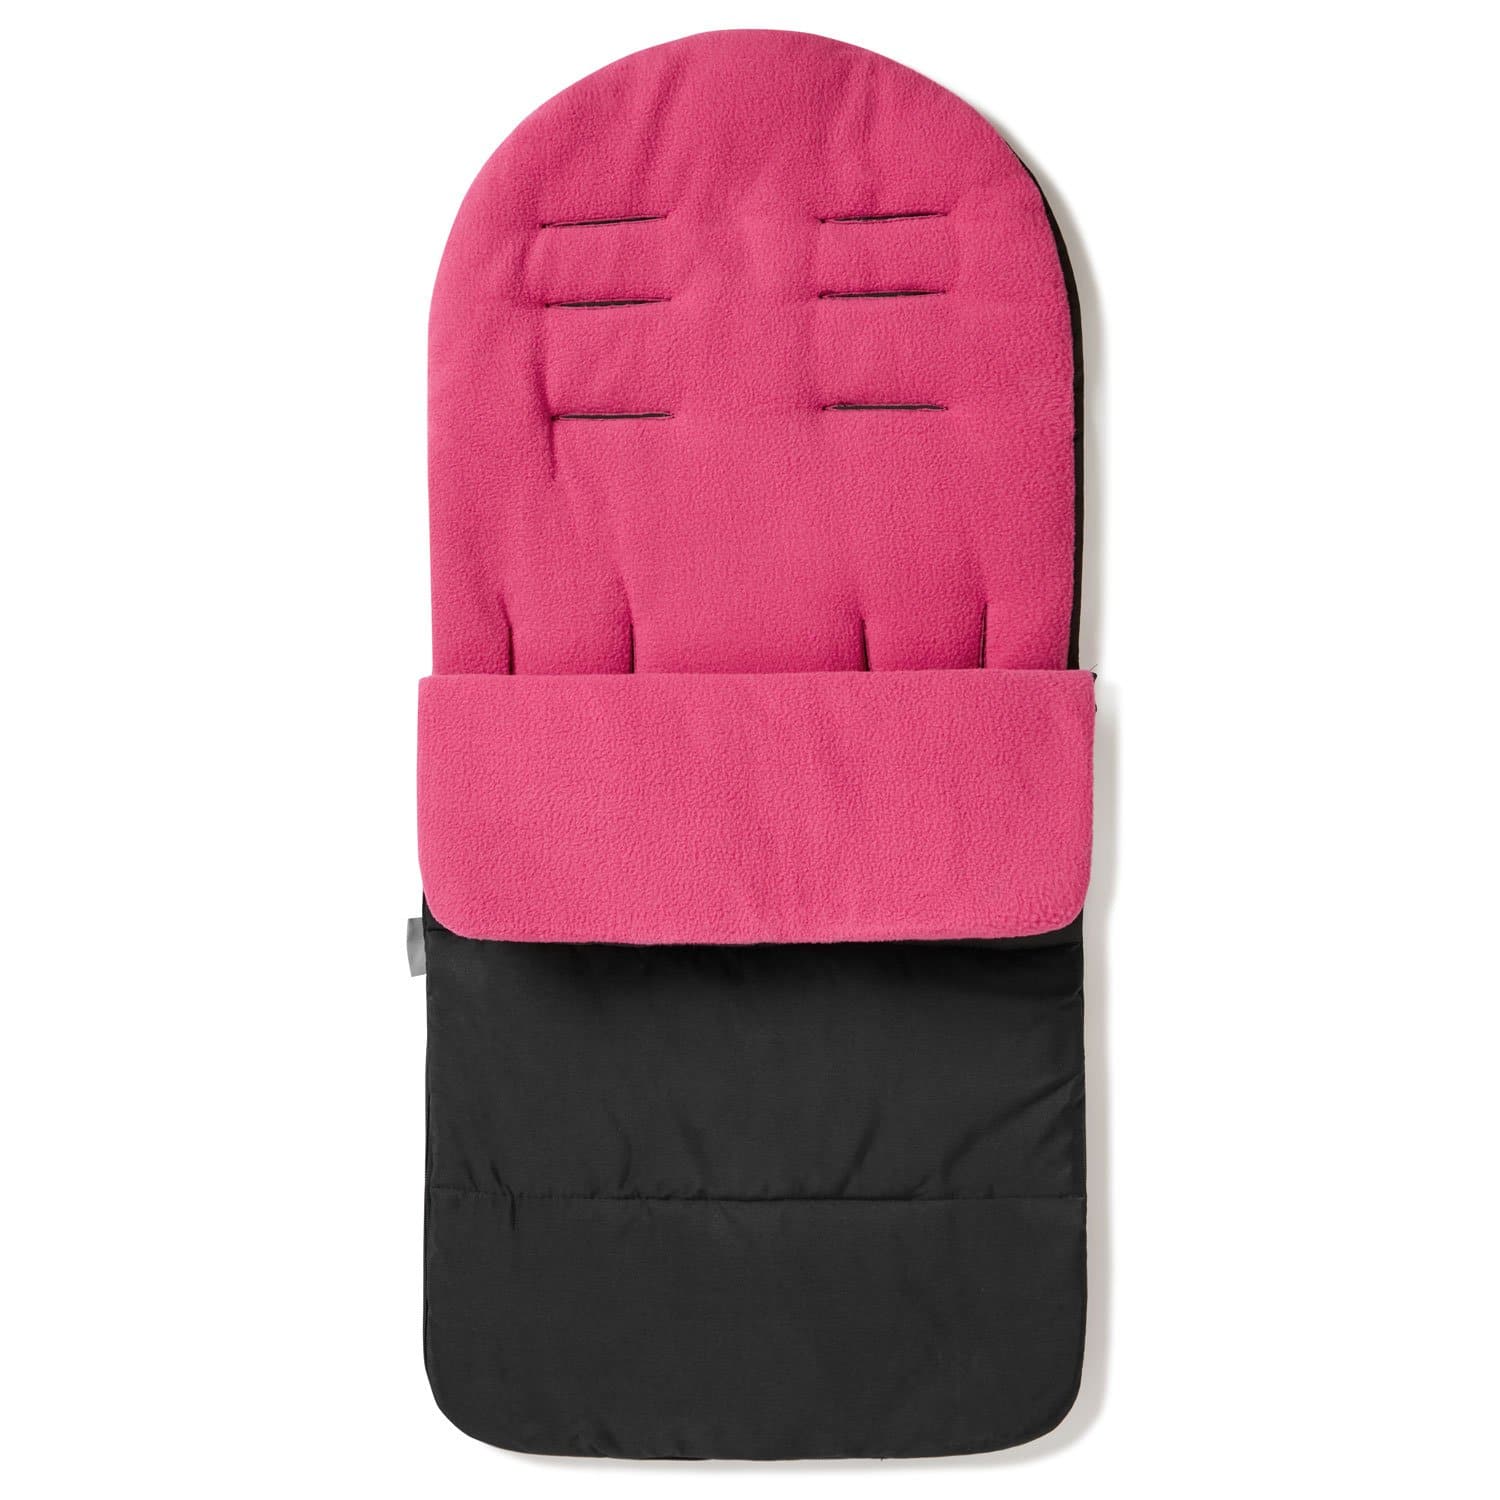 Premium Footmuff / Cosy Toes Compatible with My Child - Pink Rose / Fits All Models | For Your Little One